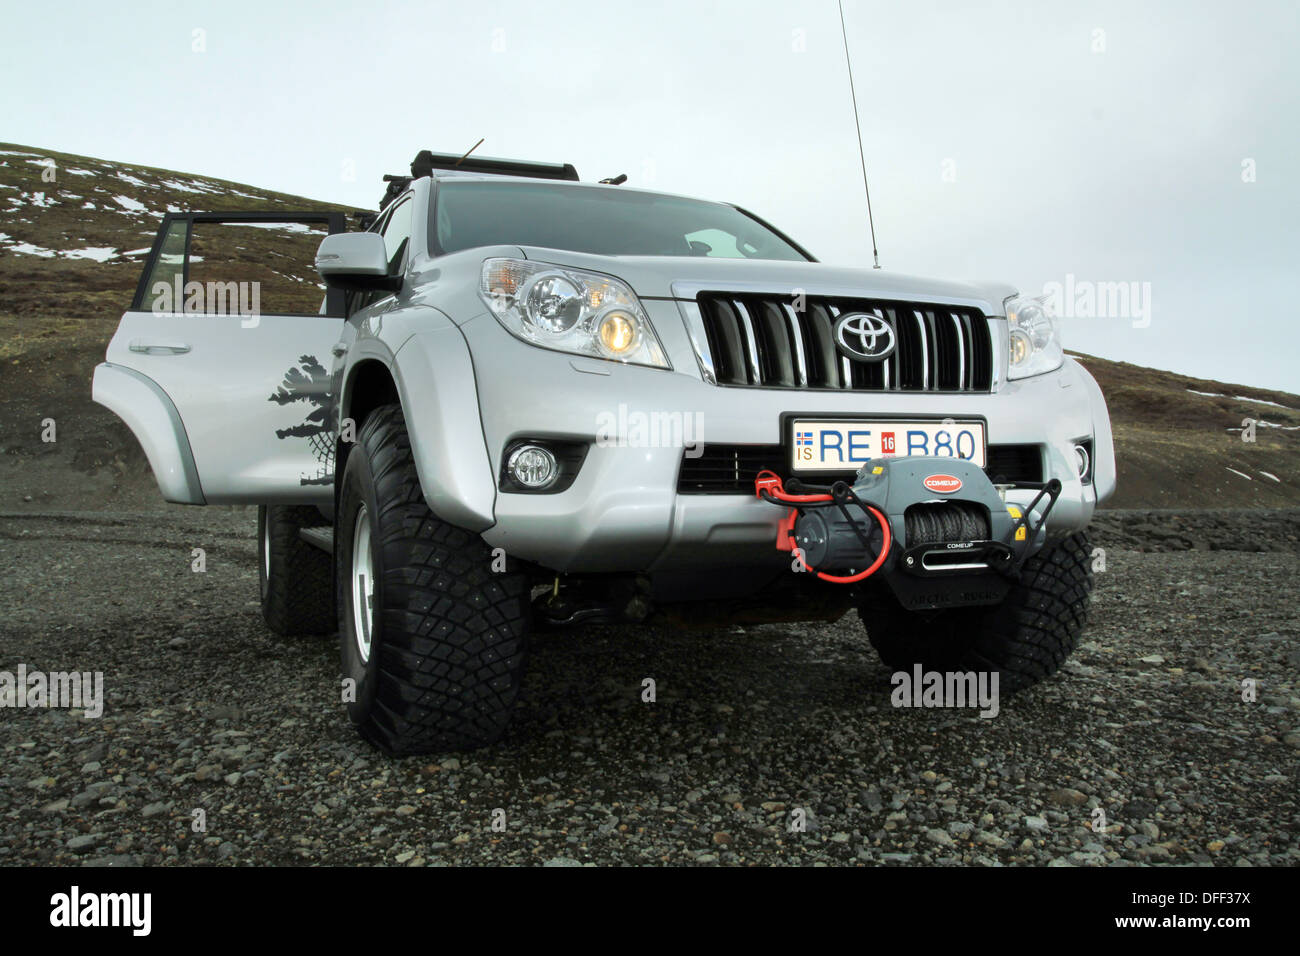 Highly modified Toyota Landcruiser for Arctic travel Stock Photo